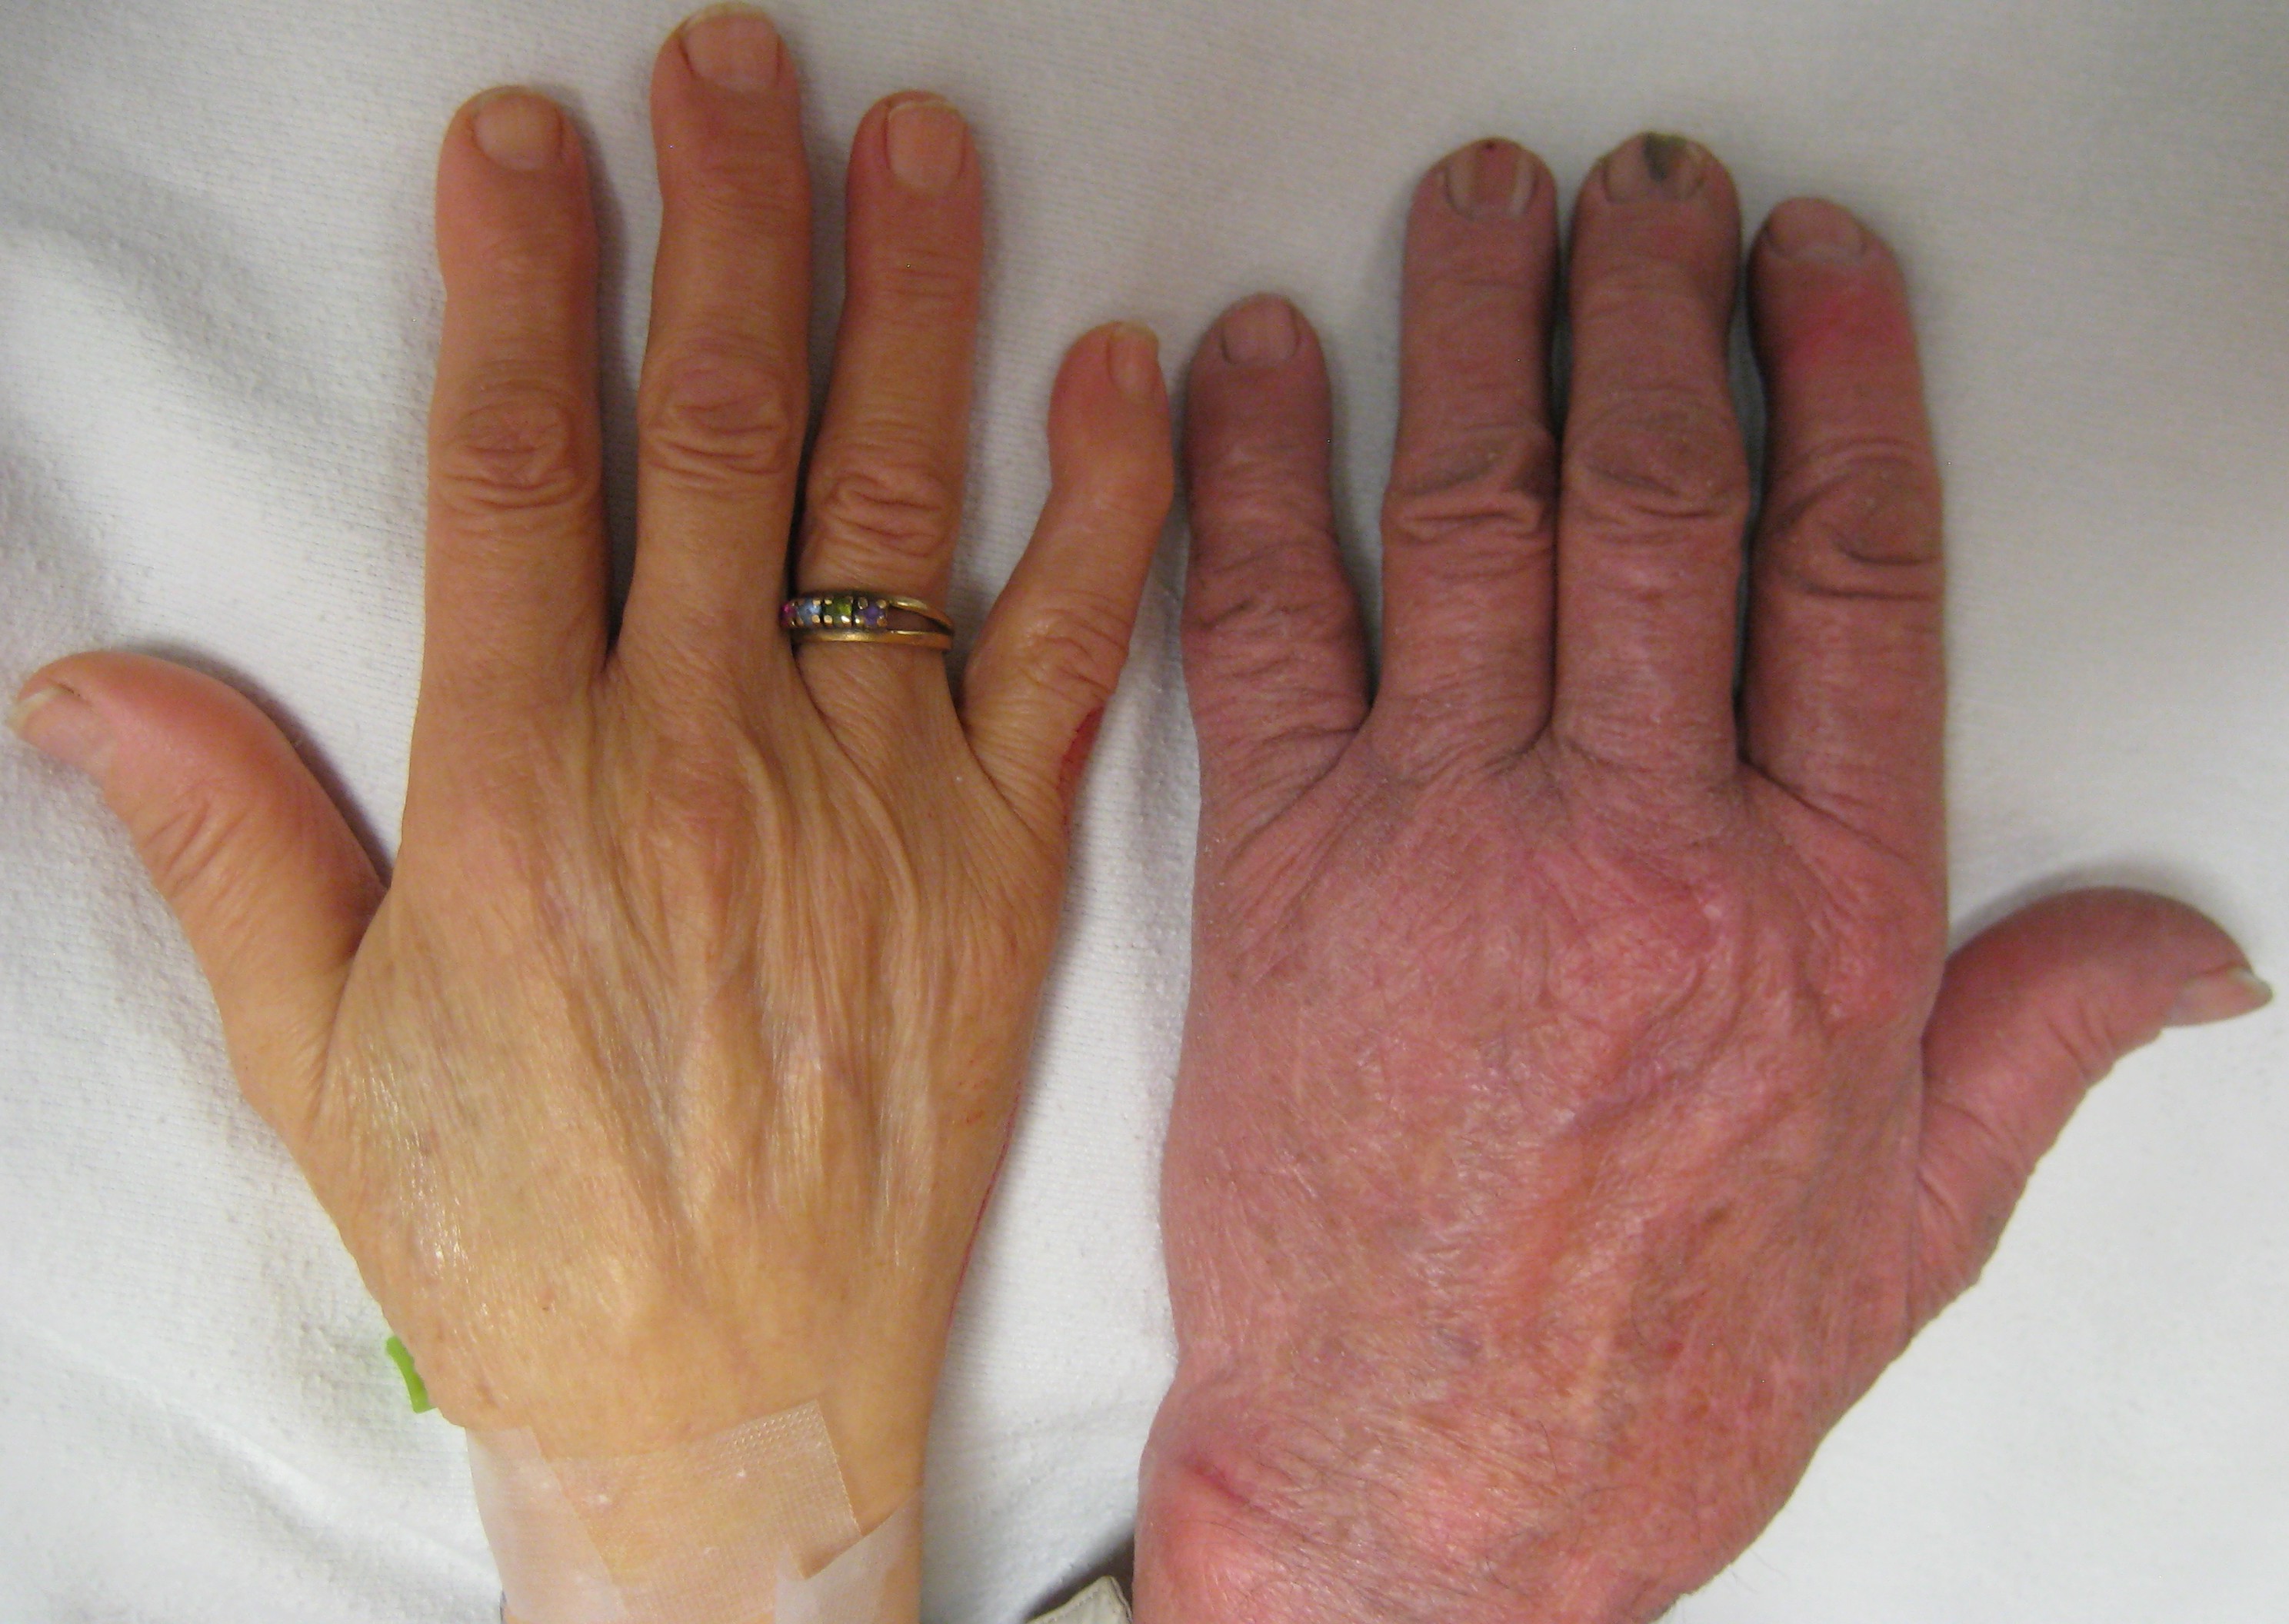 The hand of a person with severe anemia (on the left) compared to one without (on the right)By James Heilman, MD - Own work[3]